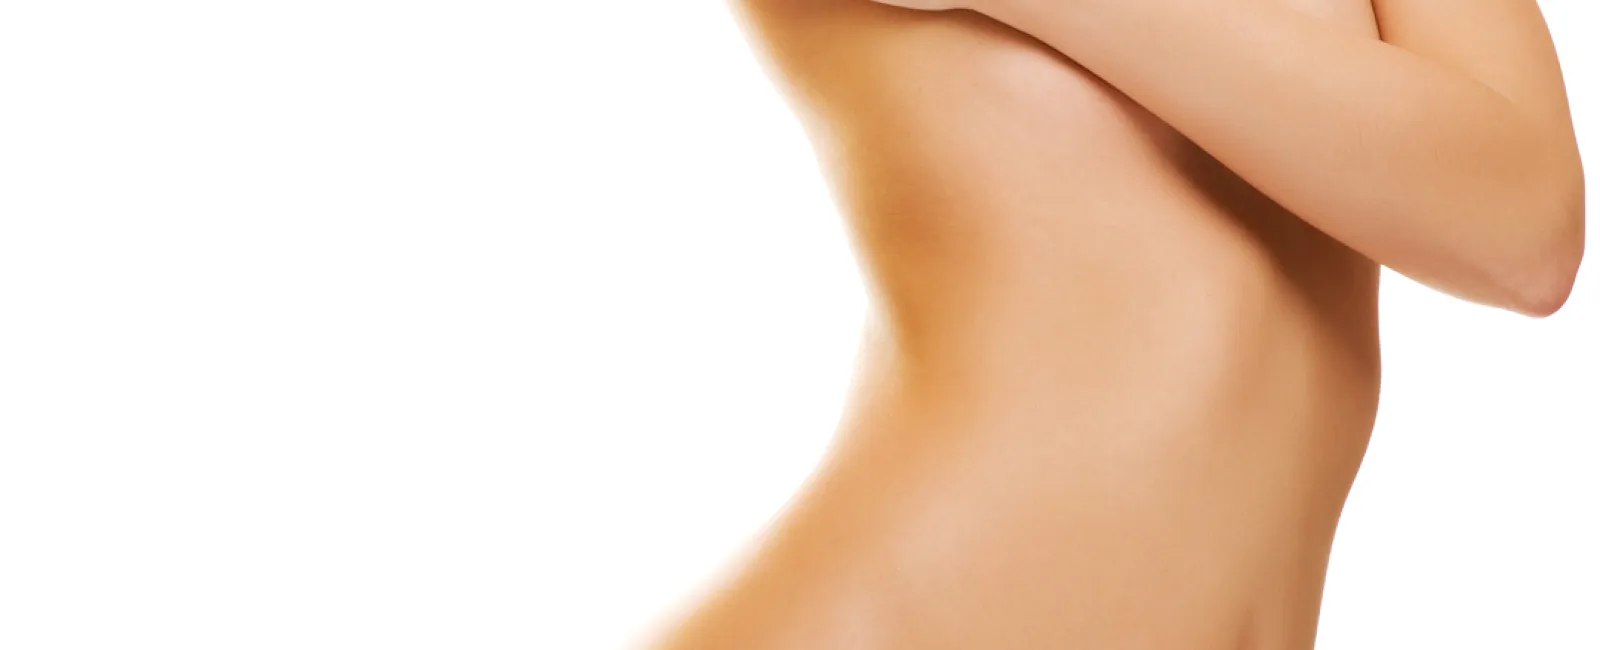 Why Is CoolSculpting So Great?